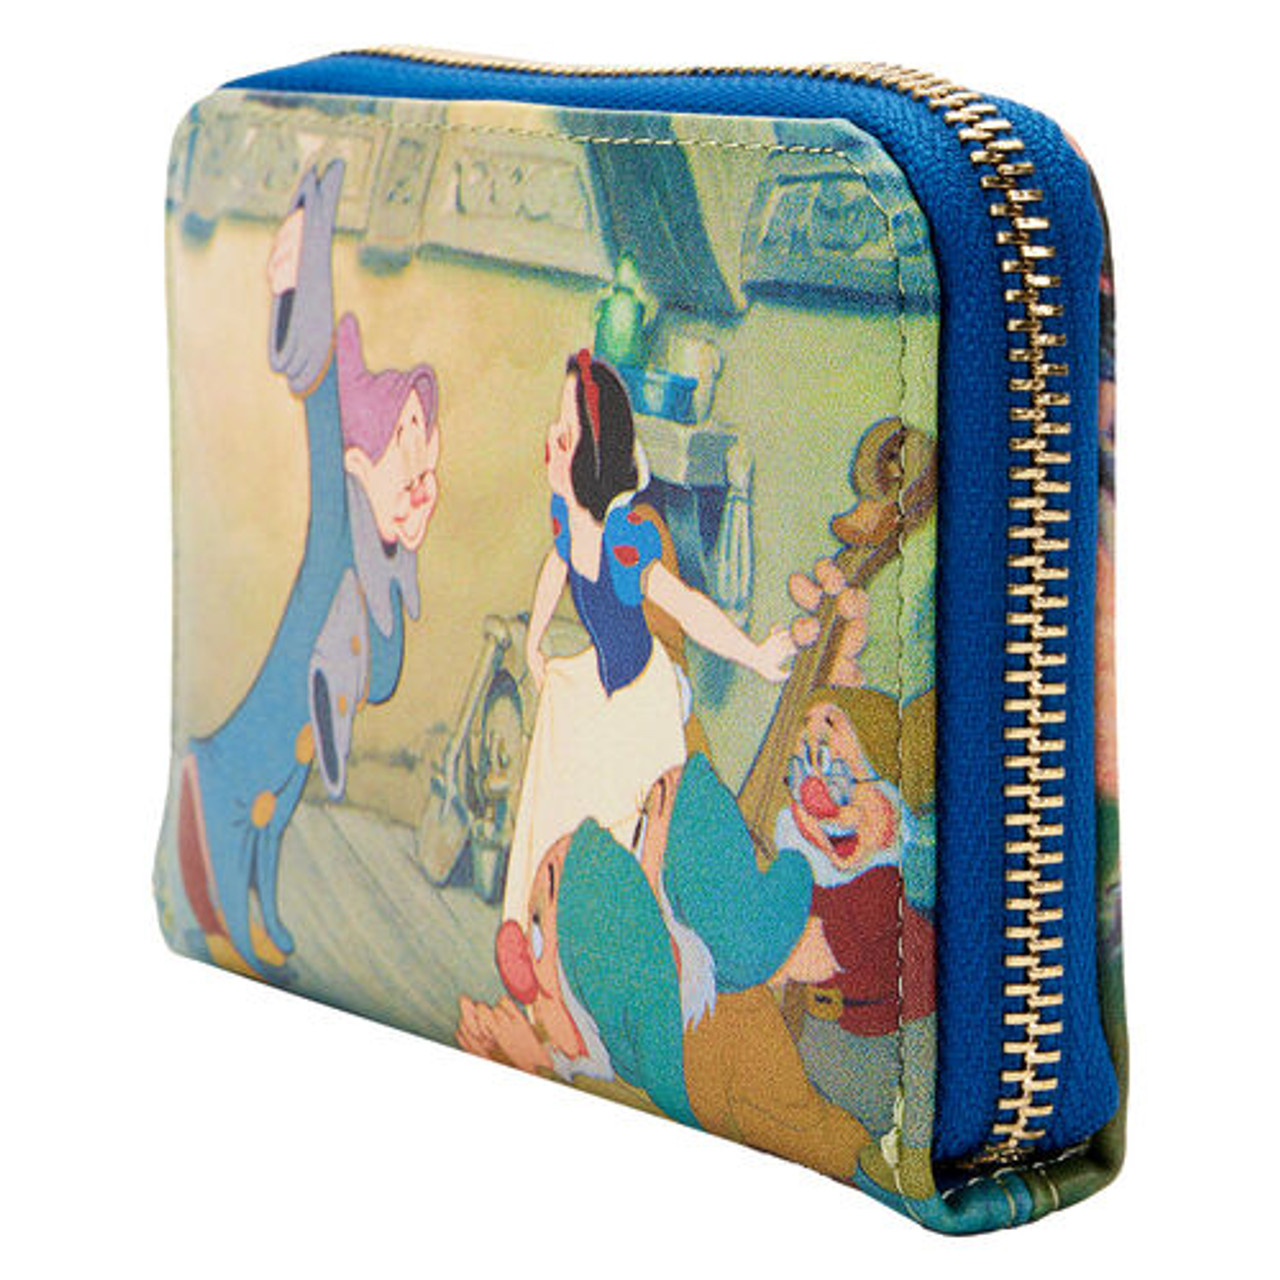 Buy Your Snow White Loungefly Purse (Free Shipping) - Merchoid